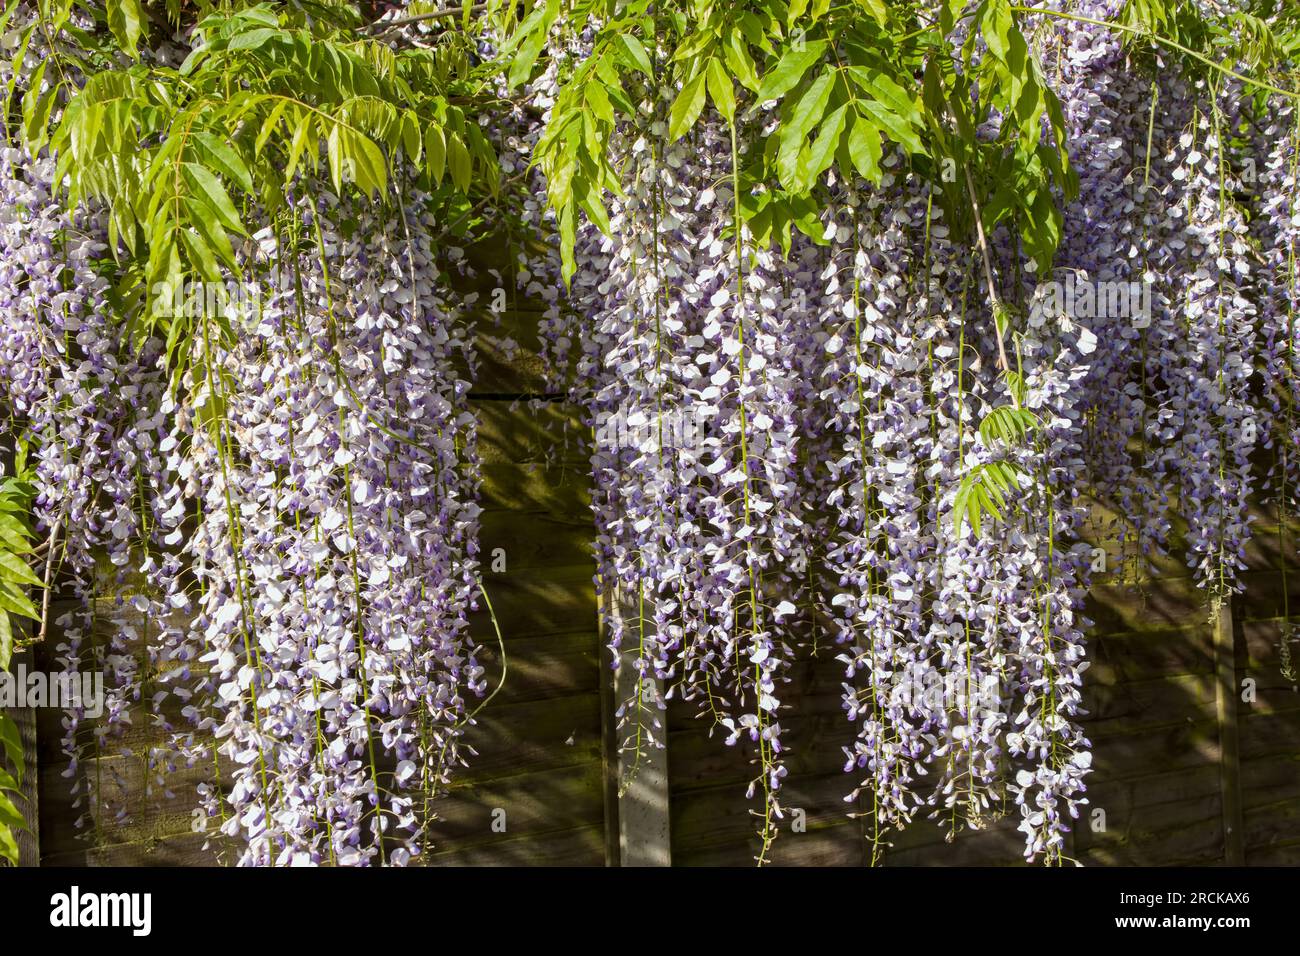 flowering wisteria a beautiful prolific tree with scented purple flowers in hanging racemes Stock Photo